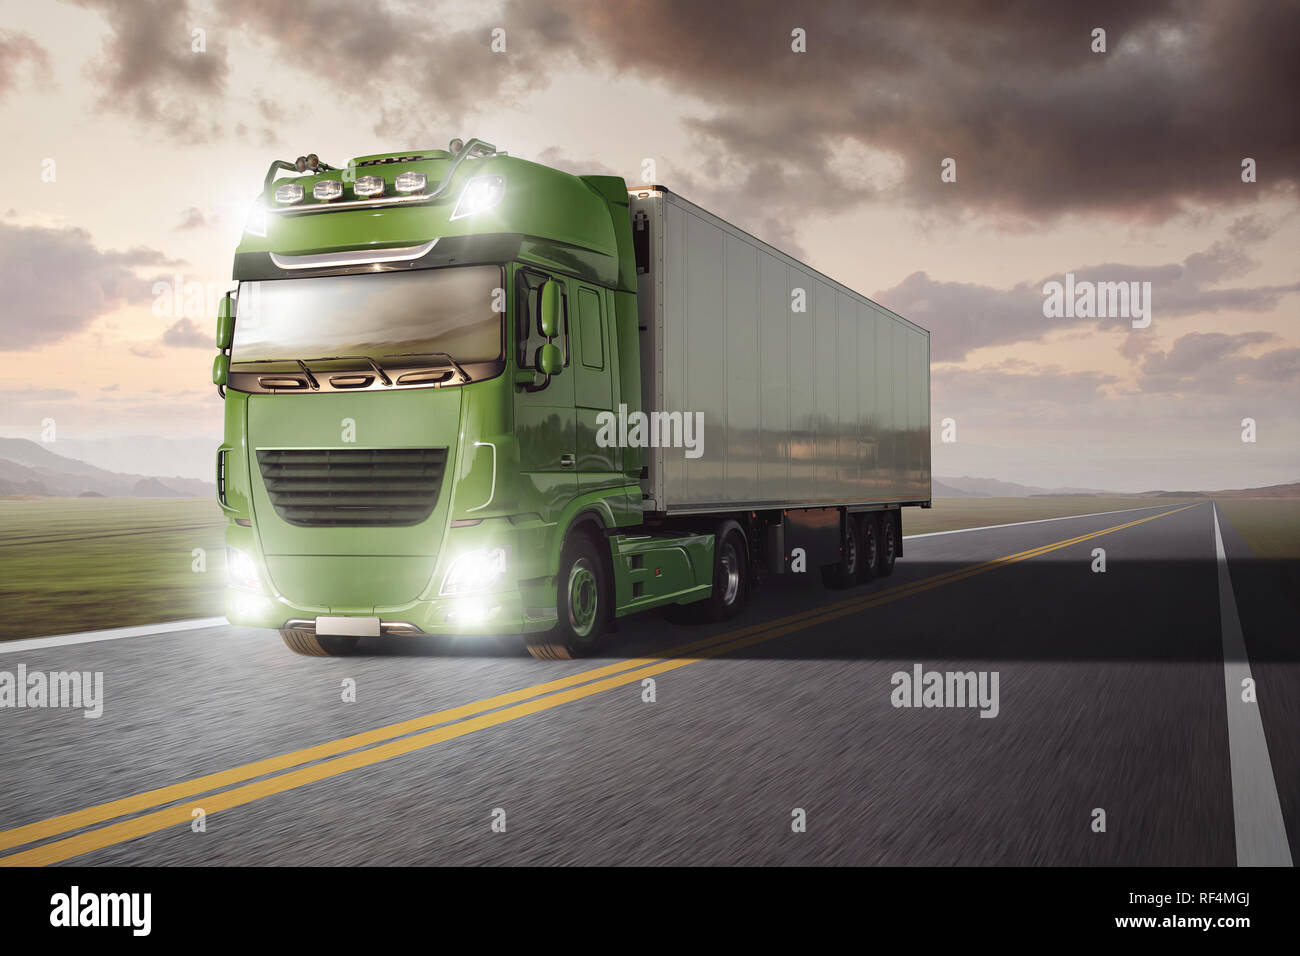 Green truck with a trailer driving on a remote highway through a landscape at dusk Stock Photo